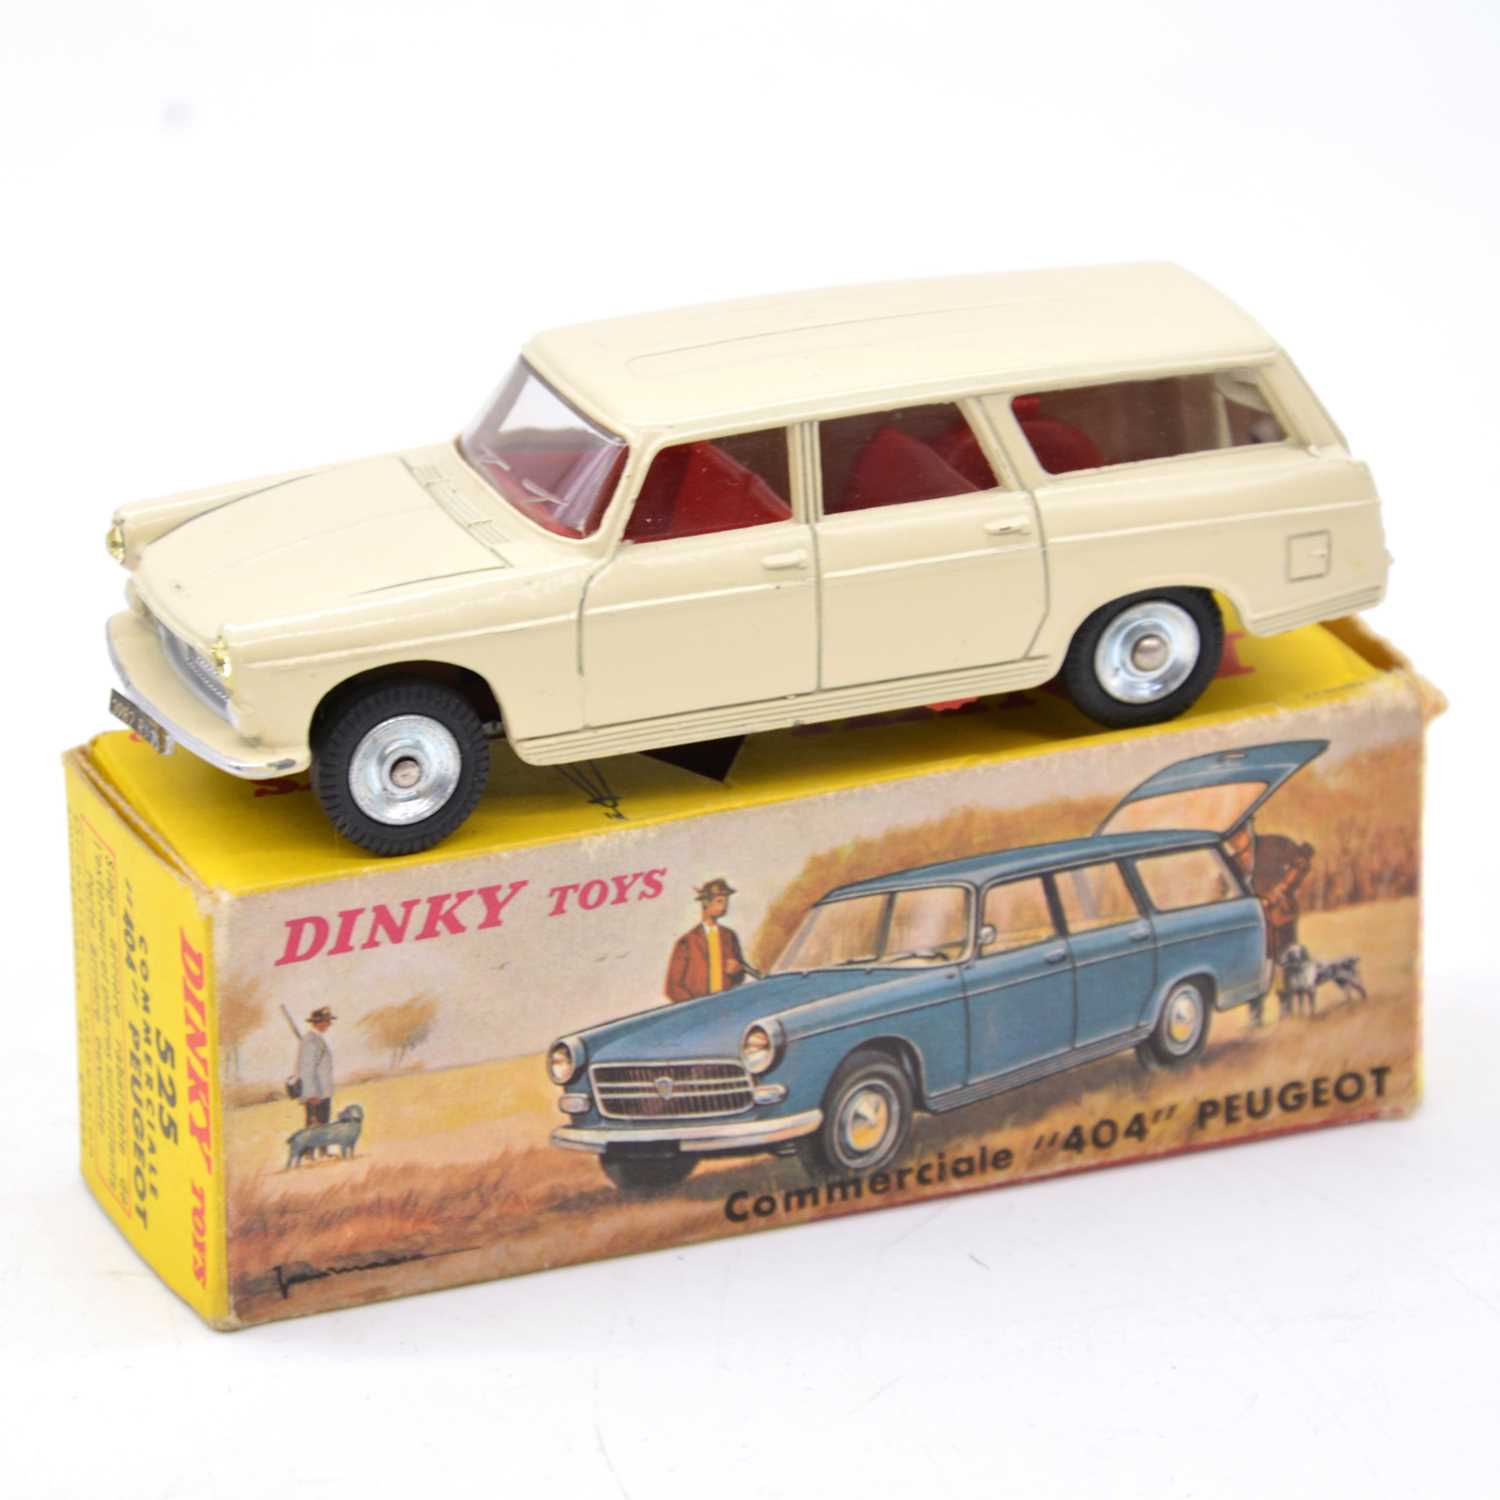 Lot 1066 - French Dinky Toys die-cast model, ref 525 Commerciale 404 Peugeot